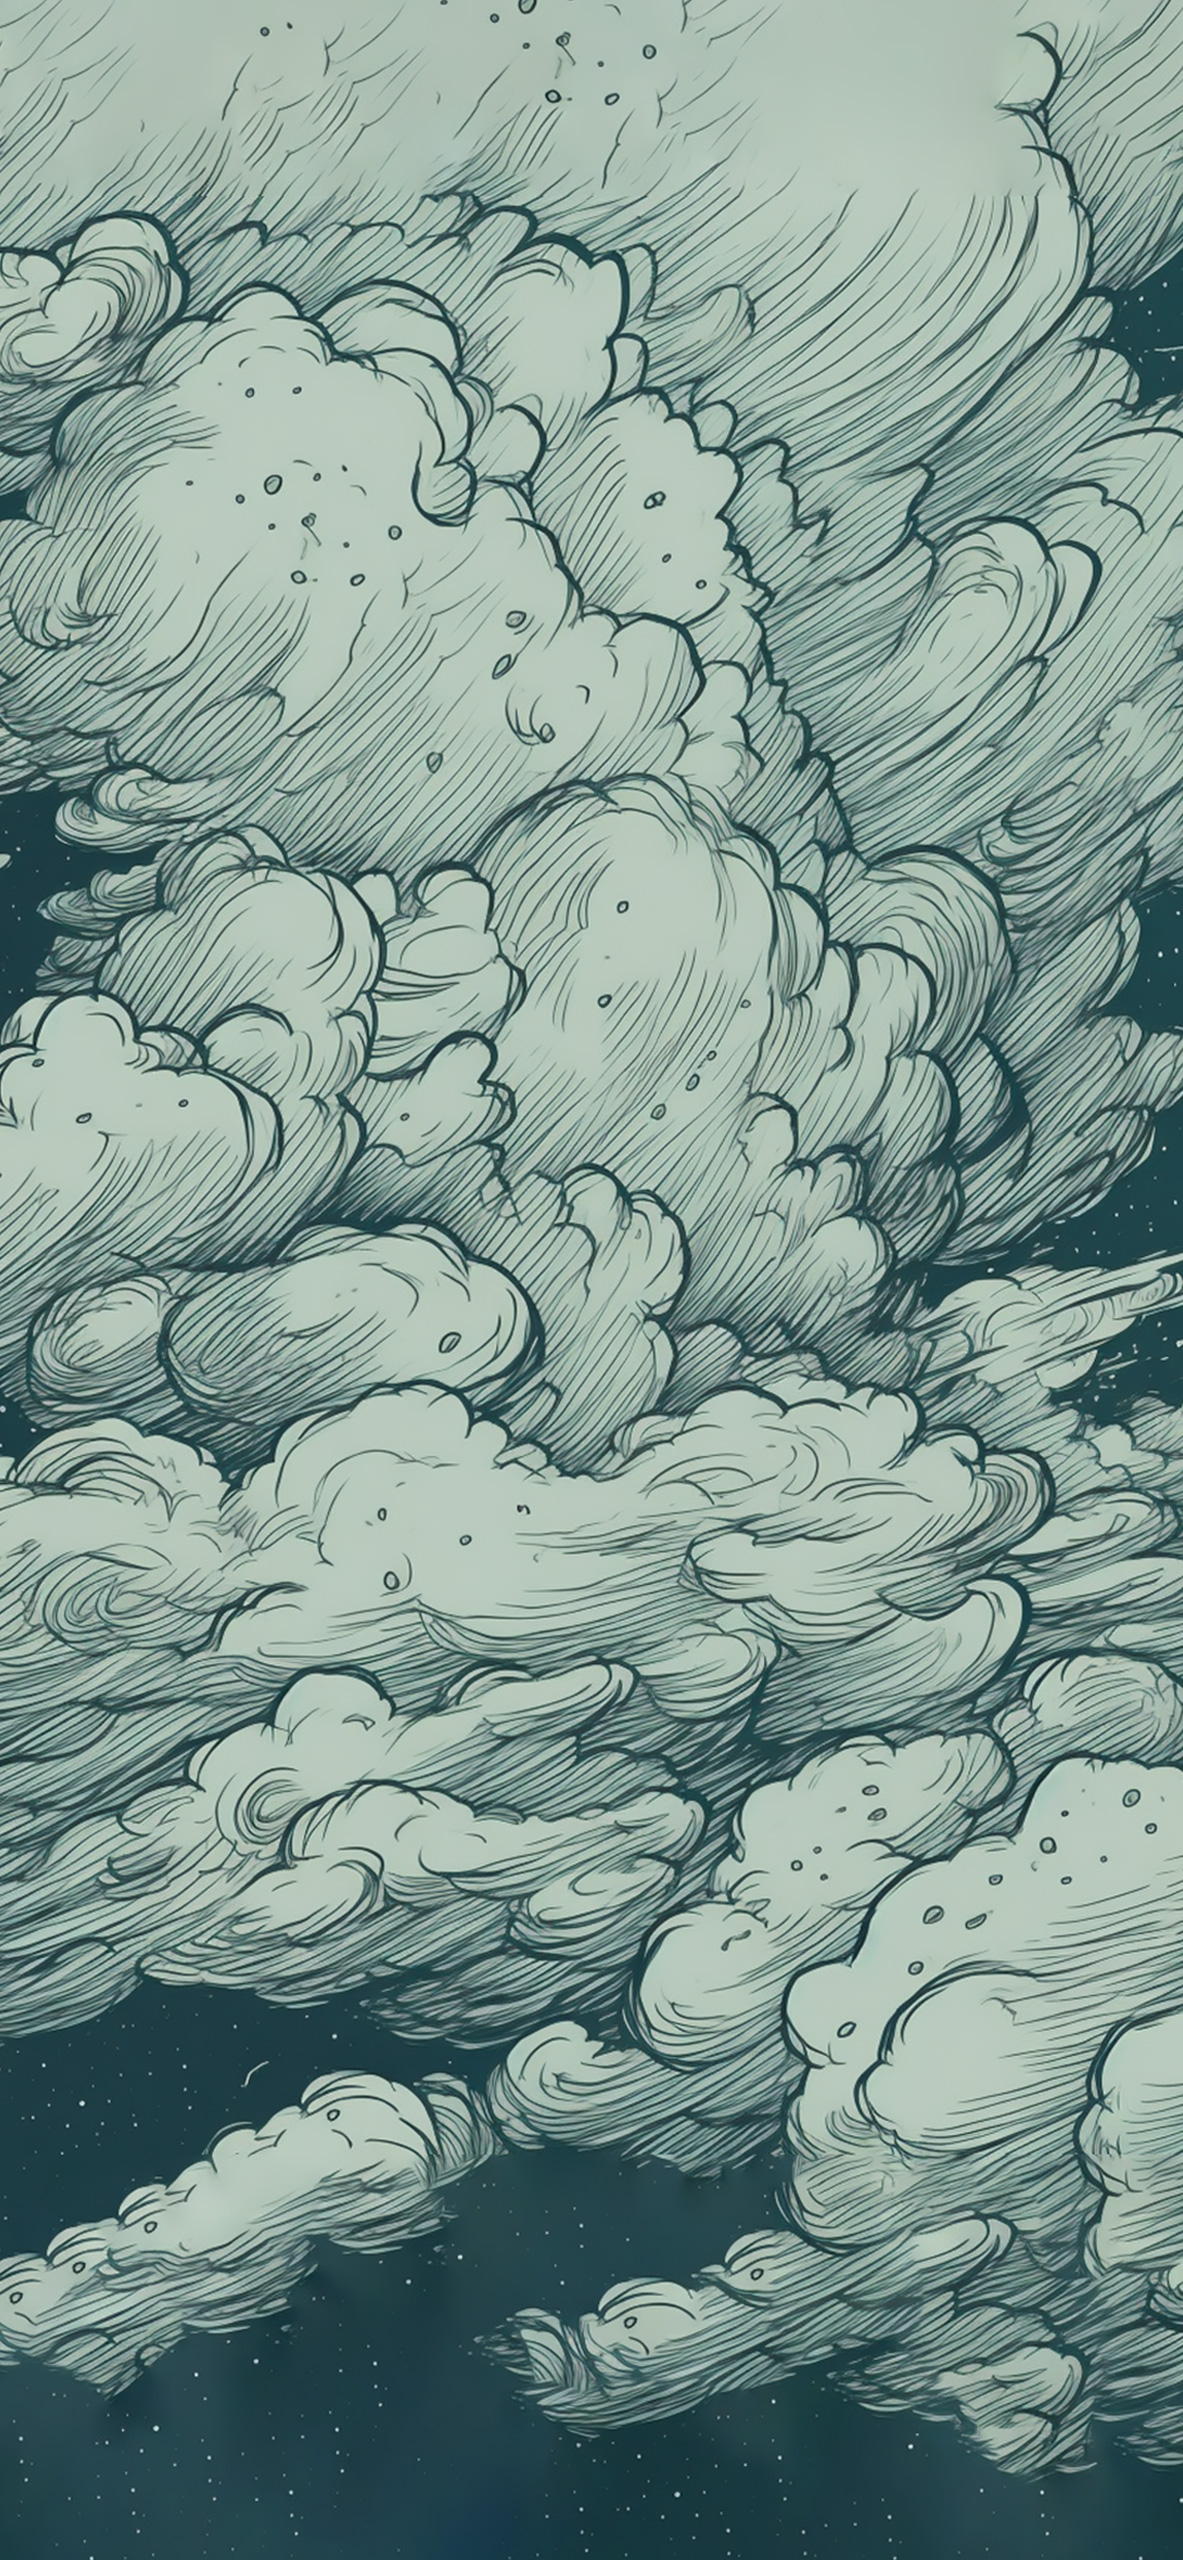 Night Clouds Sketch Wallpaper Night Clouds Wallpaper for iPhon